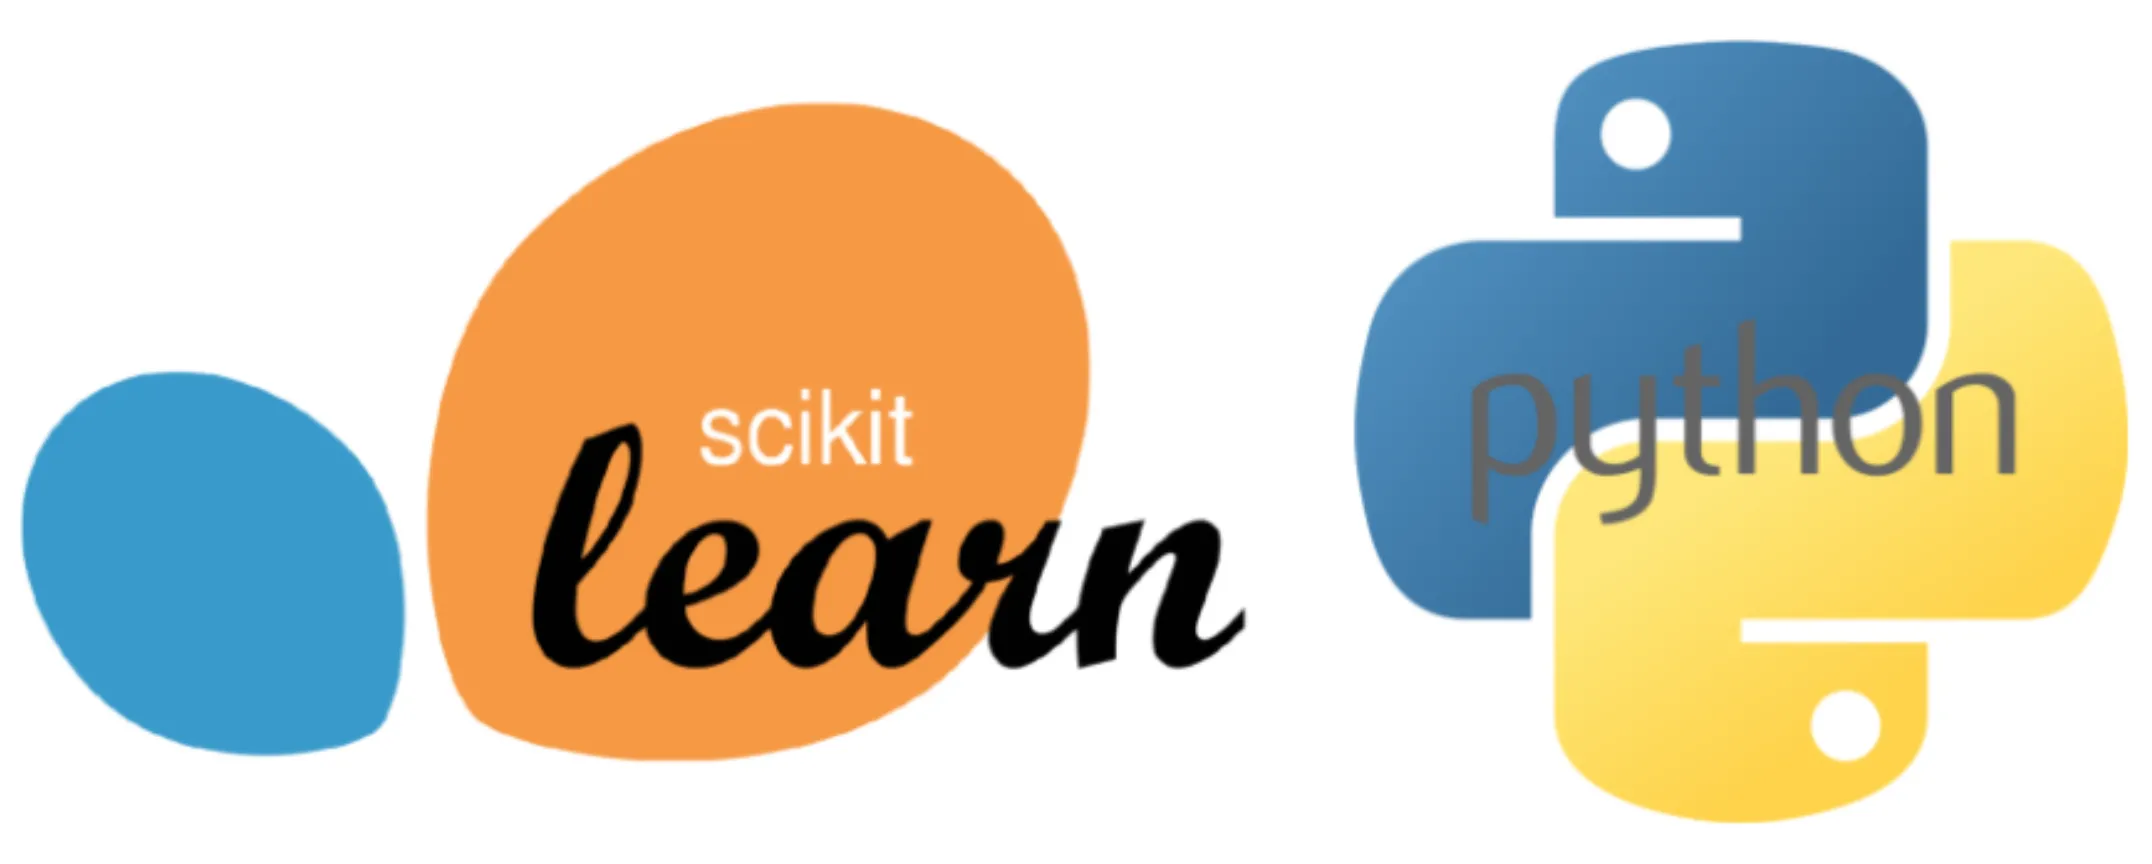 scikit-learn python machine learning library